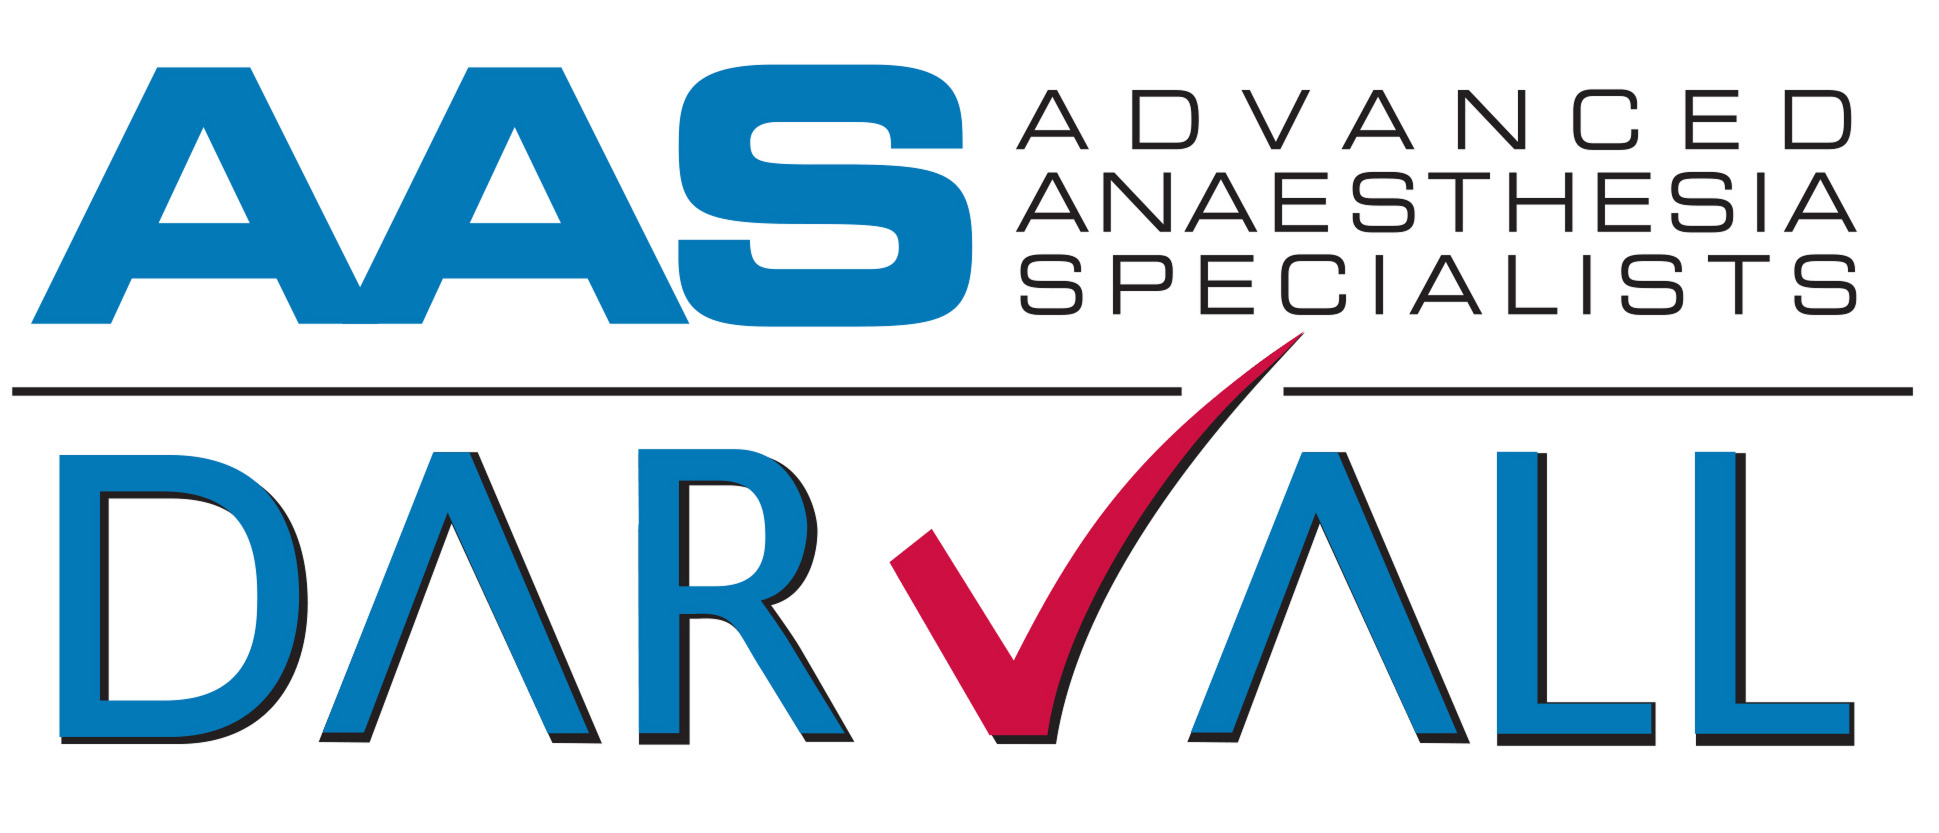 Darvall - Advanced Anaesthesia Specialists